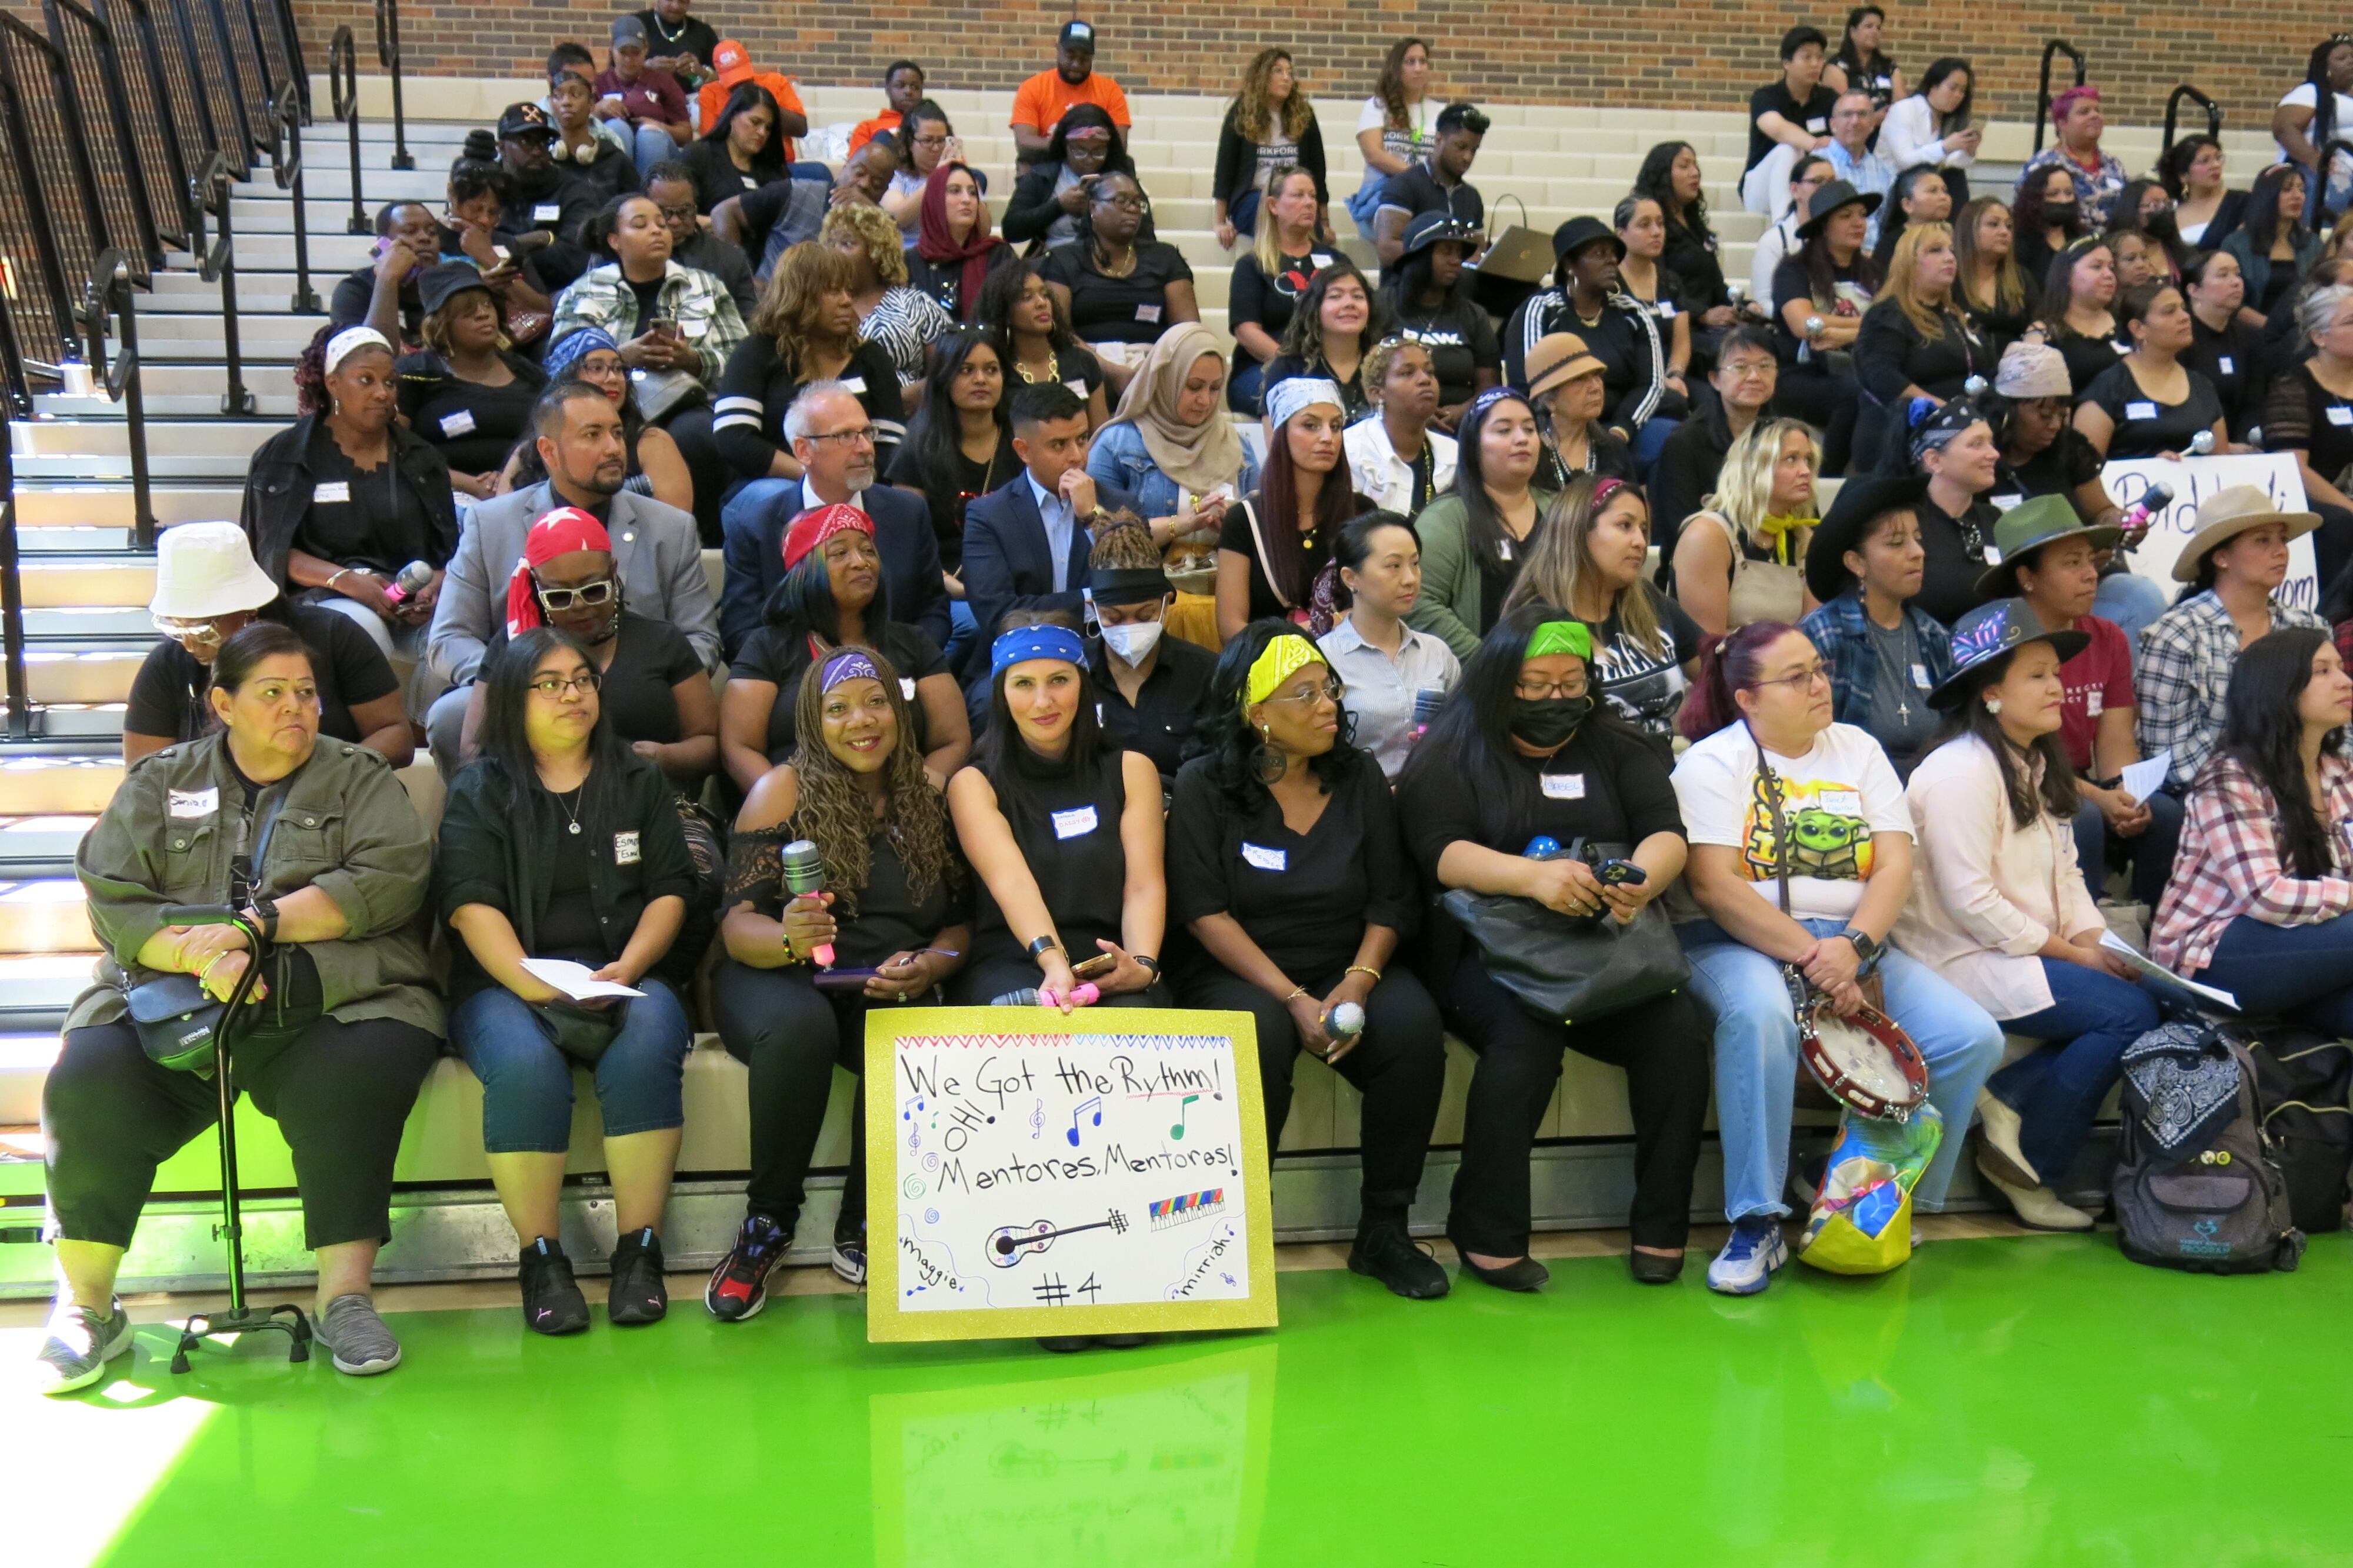 A group of people sit in the bleachers at Harry S Truman Community College in Chicago. Holding signs along a bright green floor.